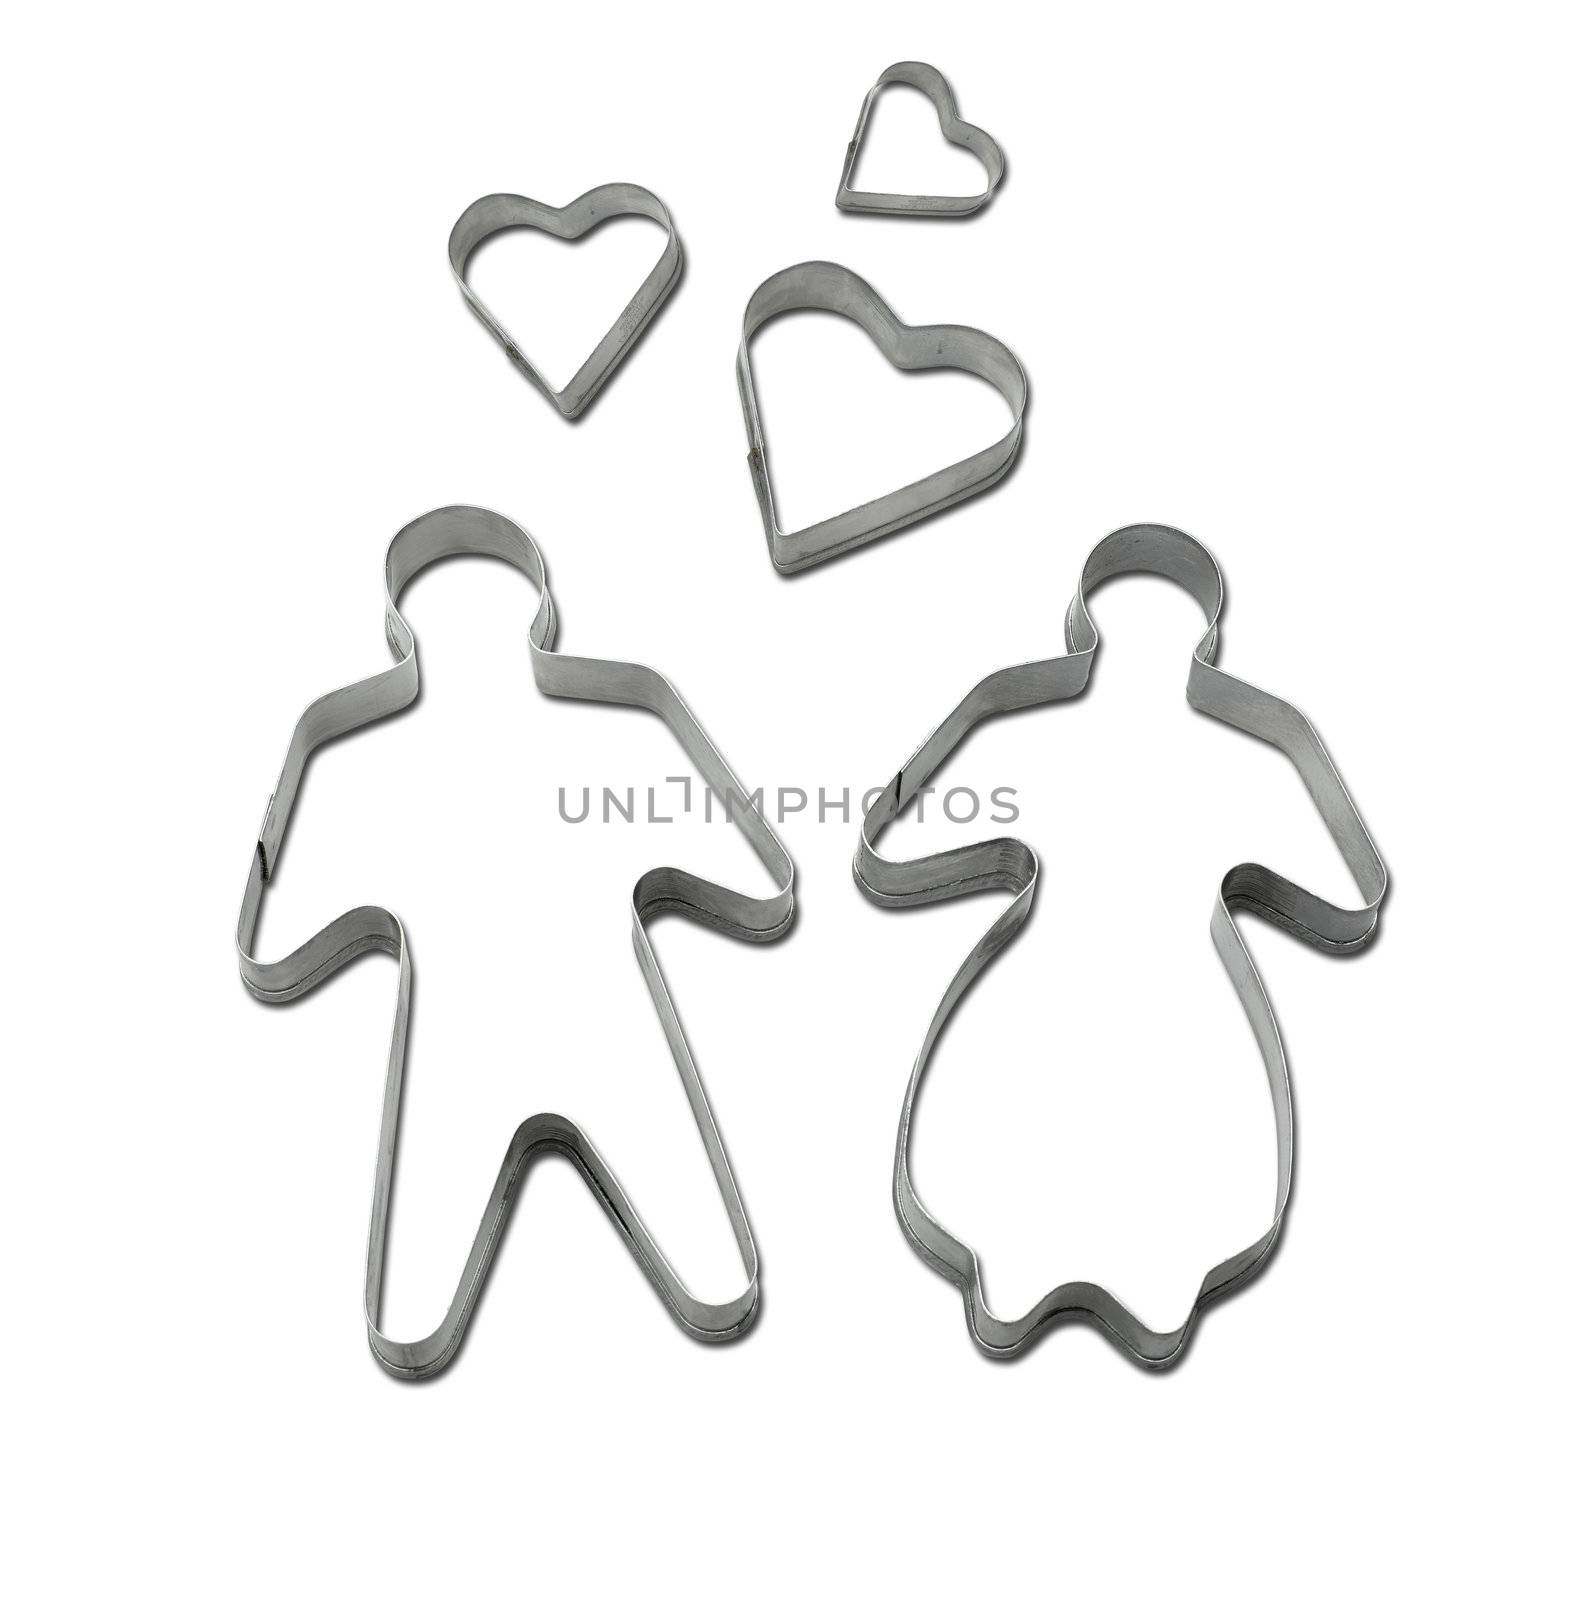 Cookie cutter (clipping path) by pbombaert